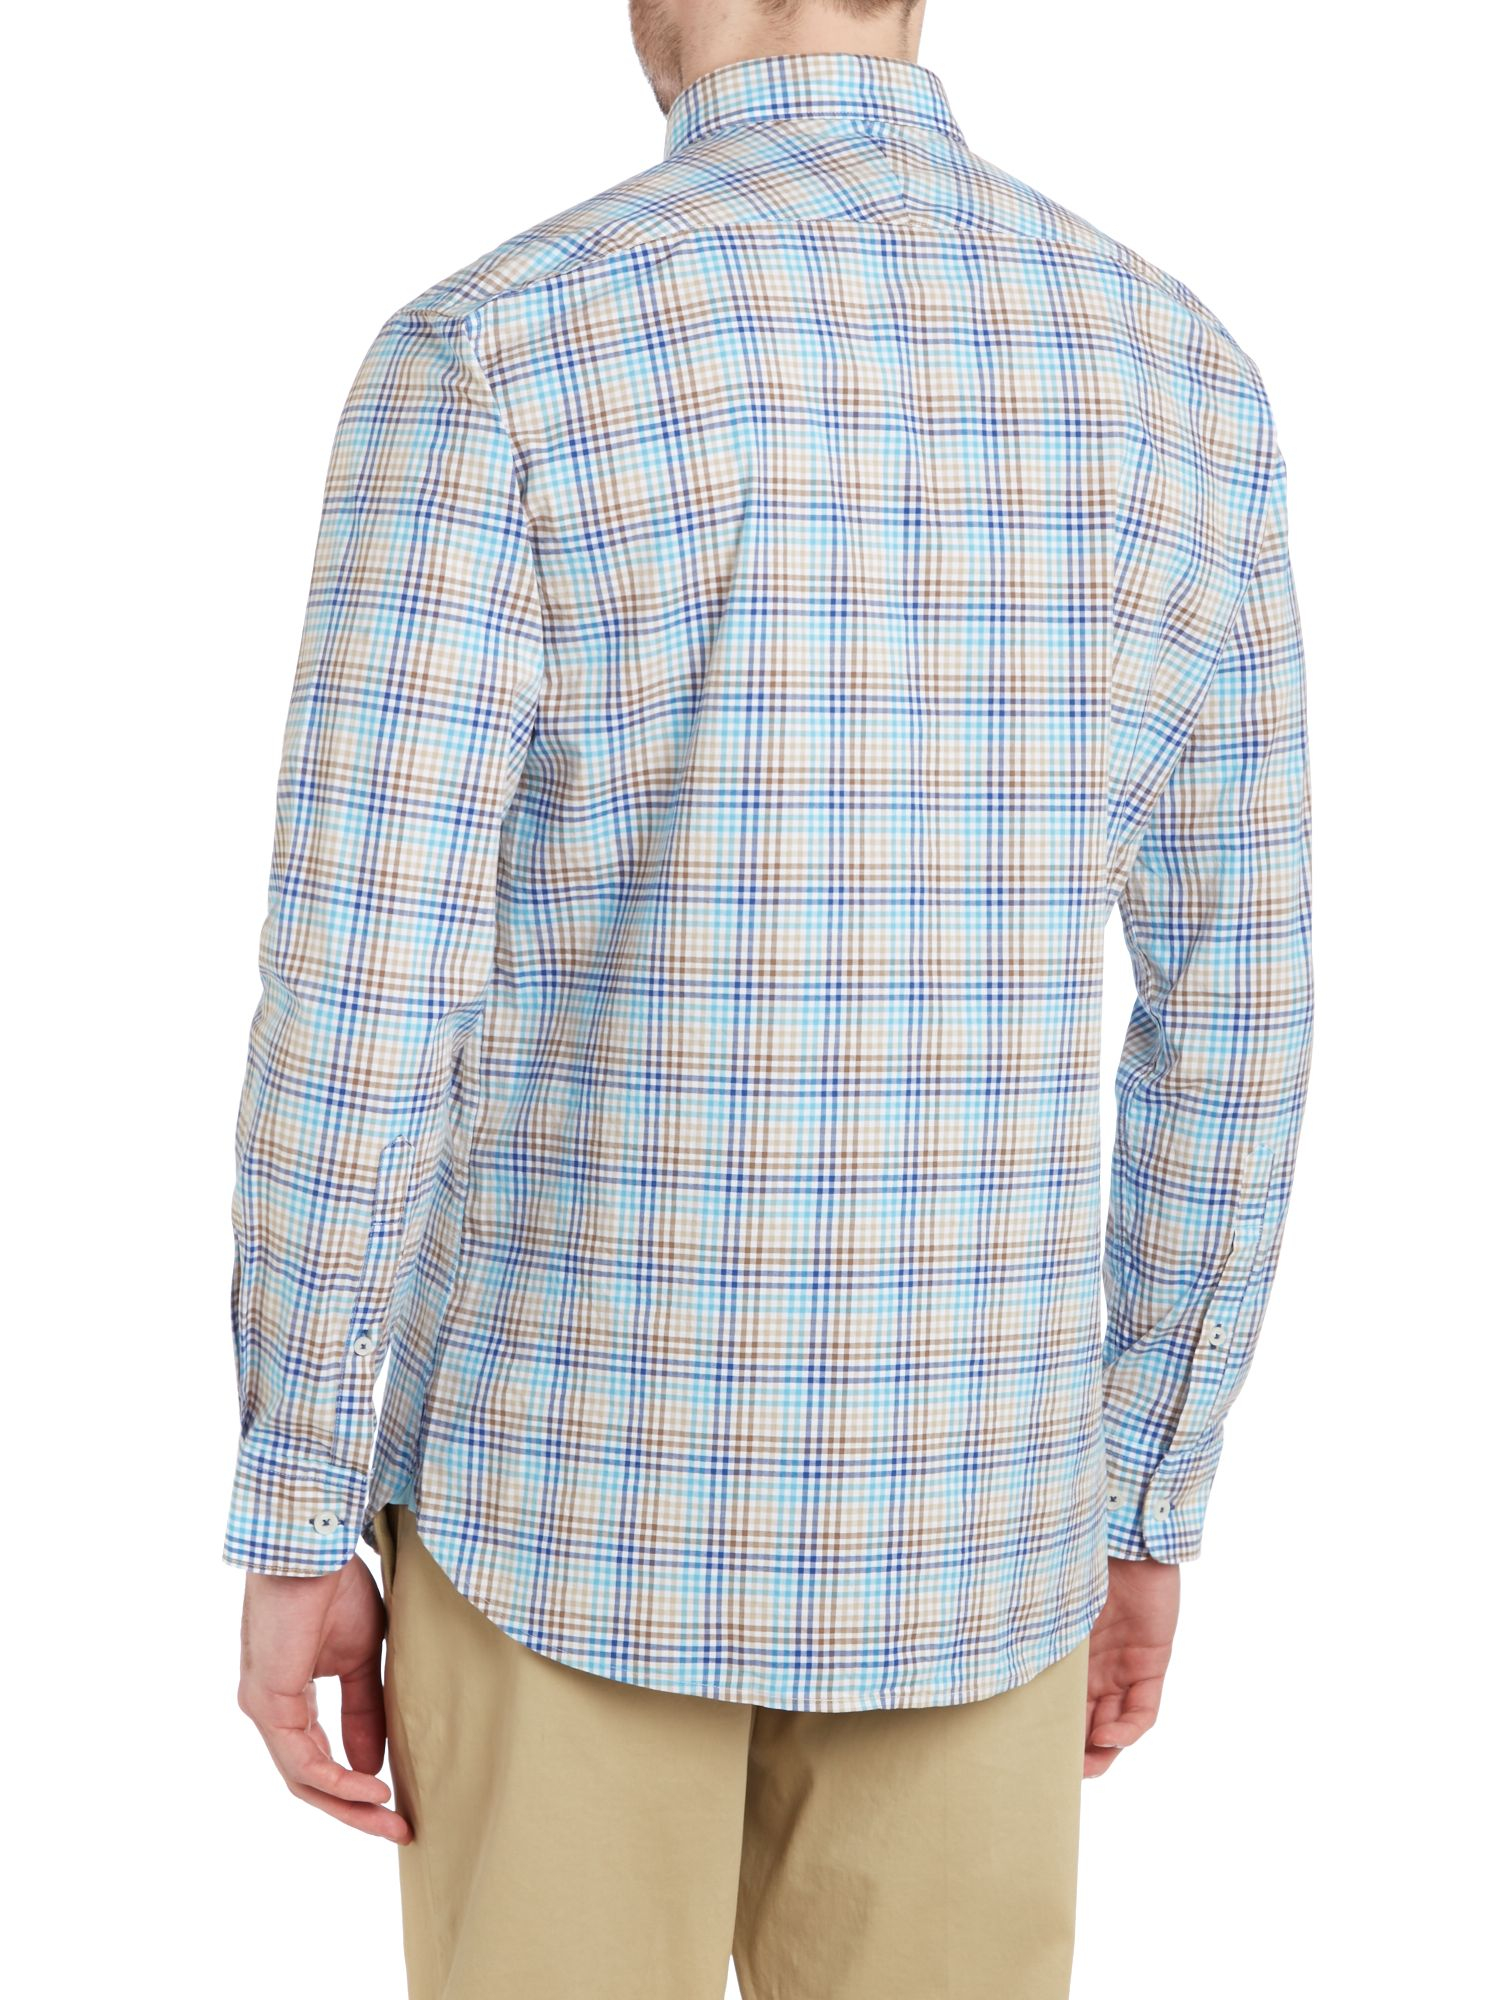 Tm Lewin | Blue Gingham Check Casual Long Sleeve Shirt for Men | Lyst